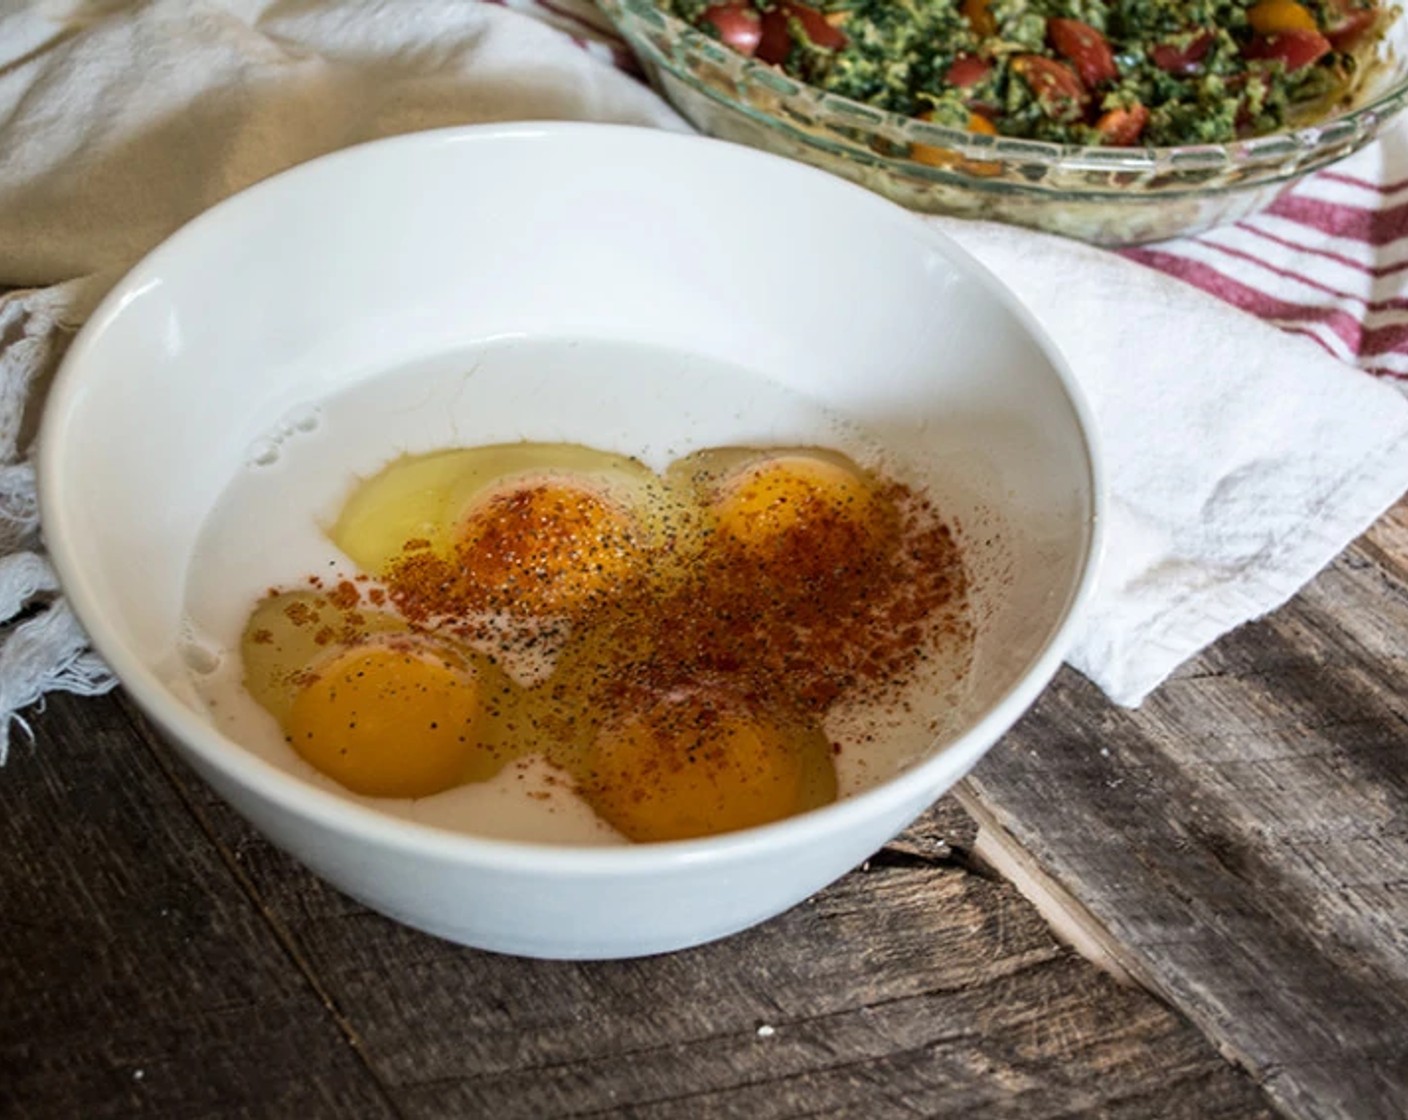 step 6 In a separate mixing bowl, whisk together Eggs (4), Almond Milk (1/4 cup), Smoked Paprika, and Ground Black Pepper until thoroughly combined.